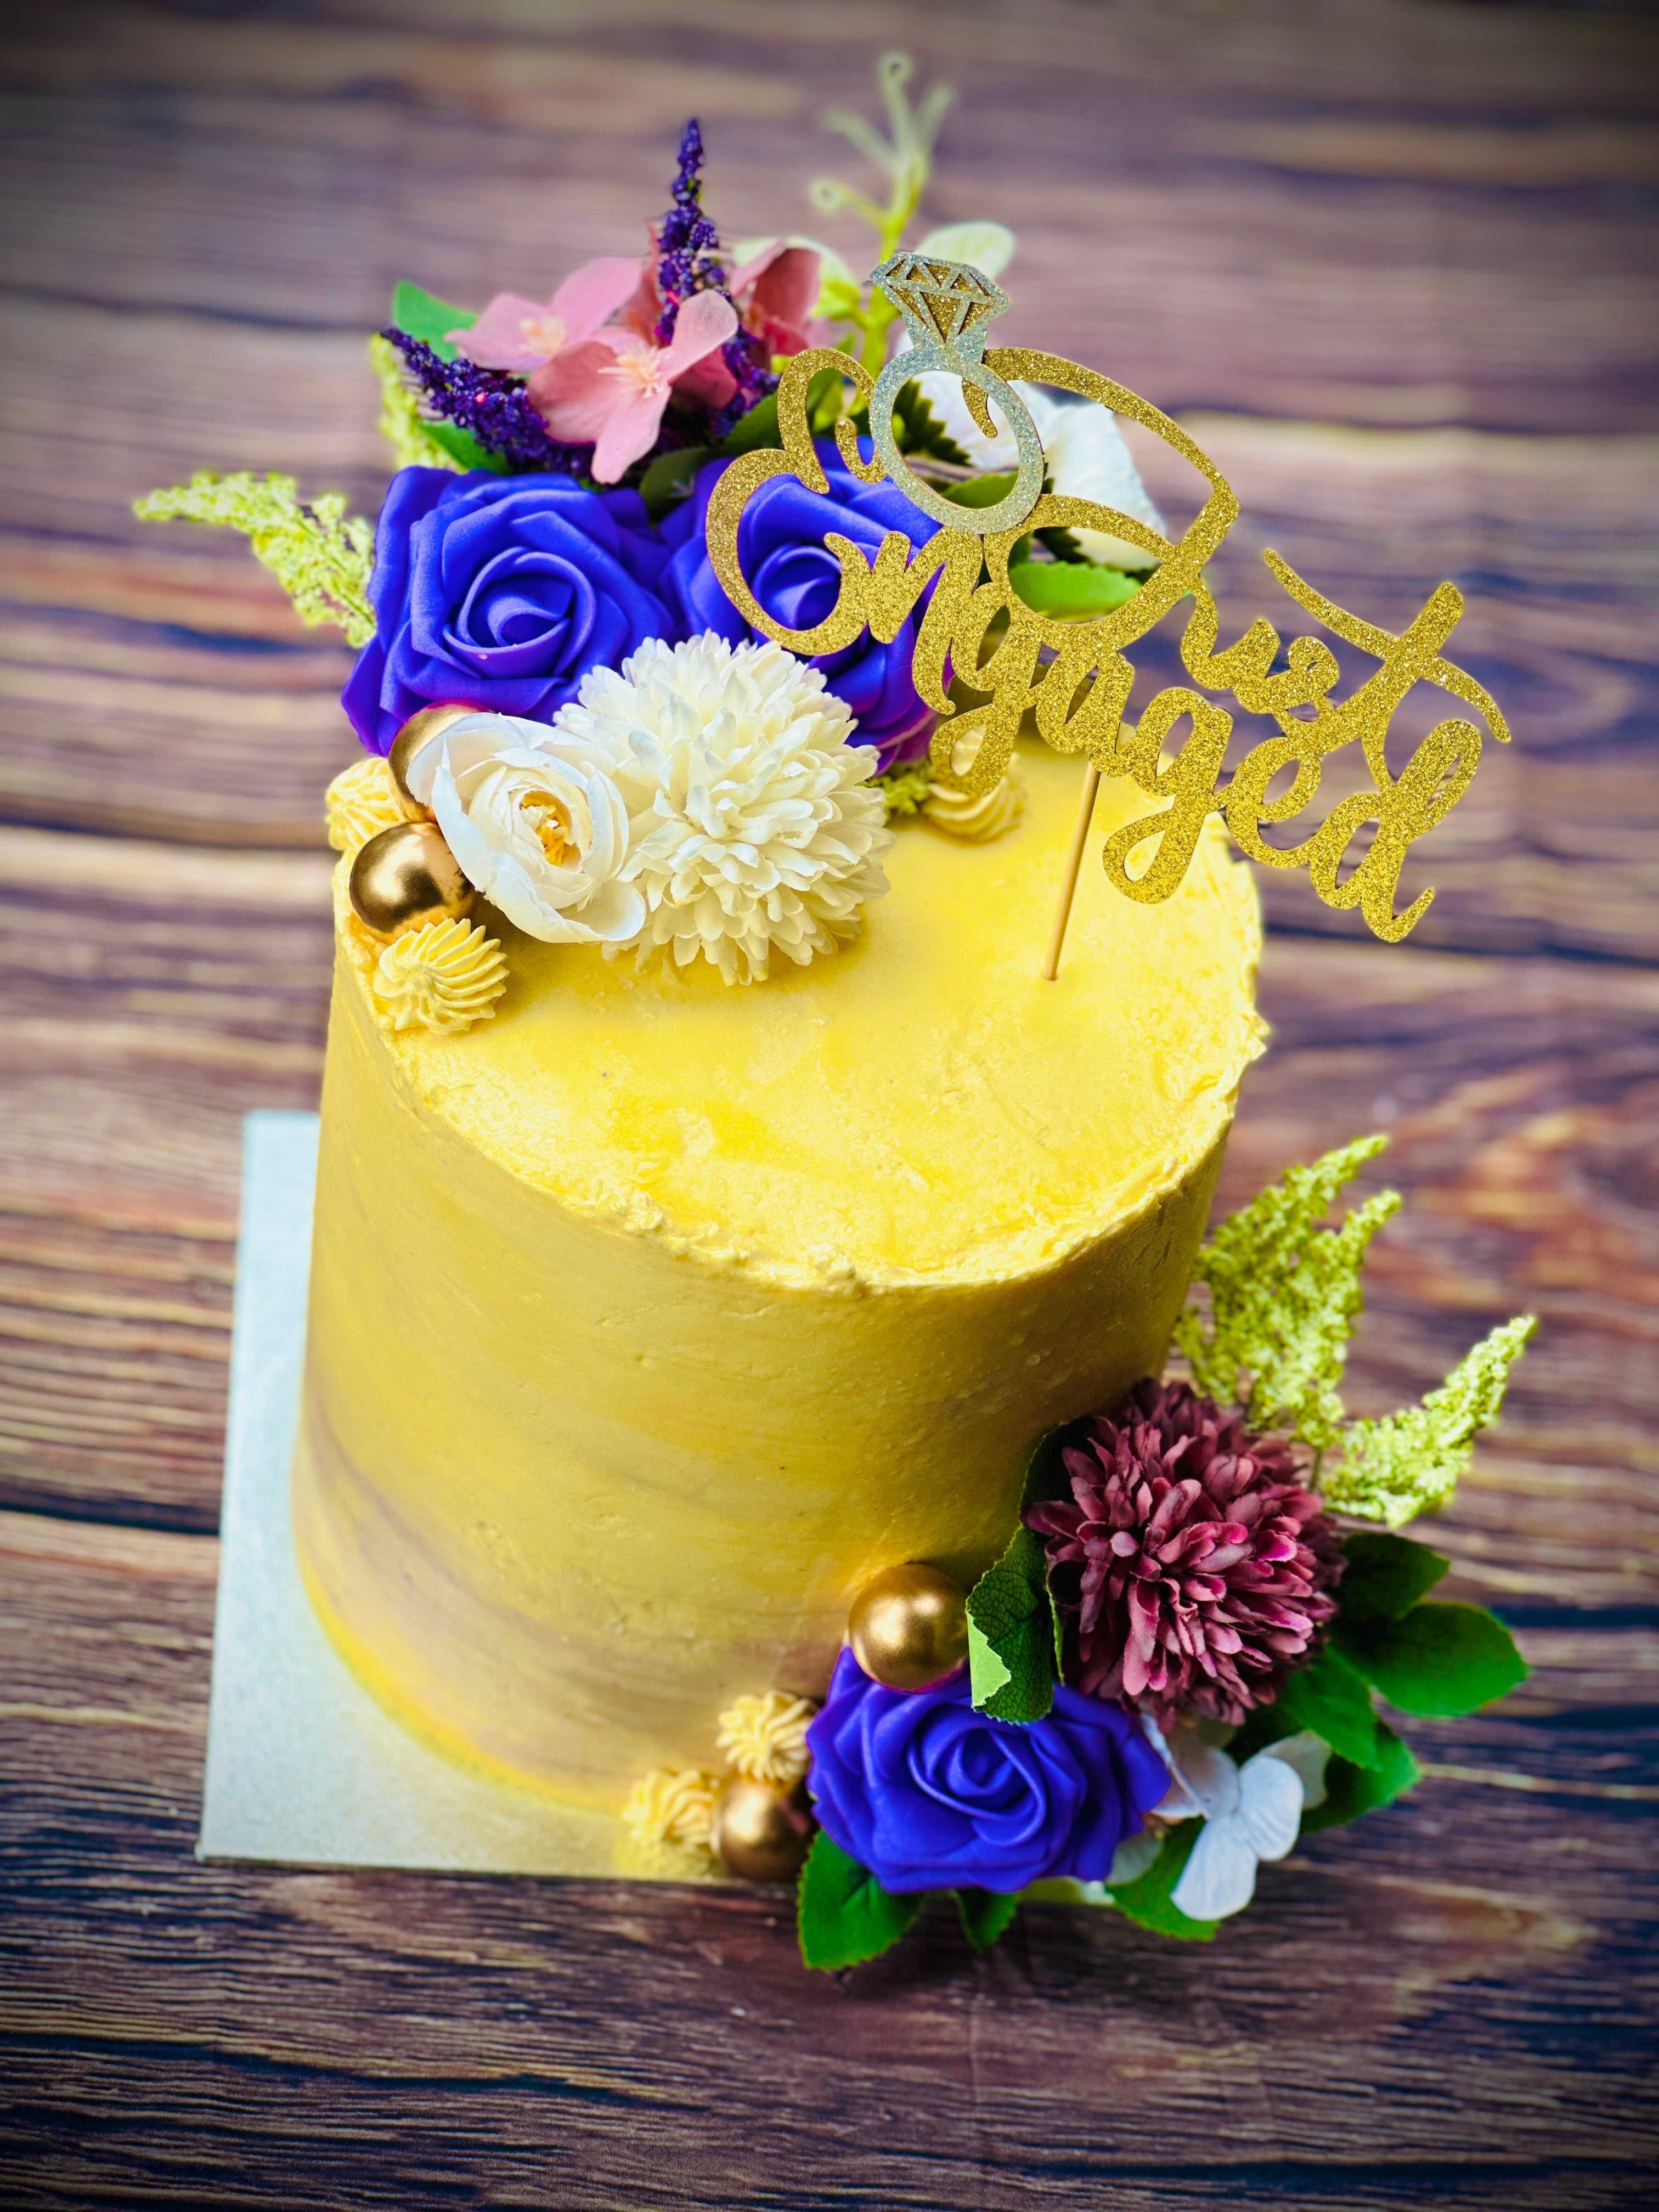 These are the prettiest wedding cakes of 2019 - Bridal Musings